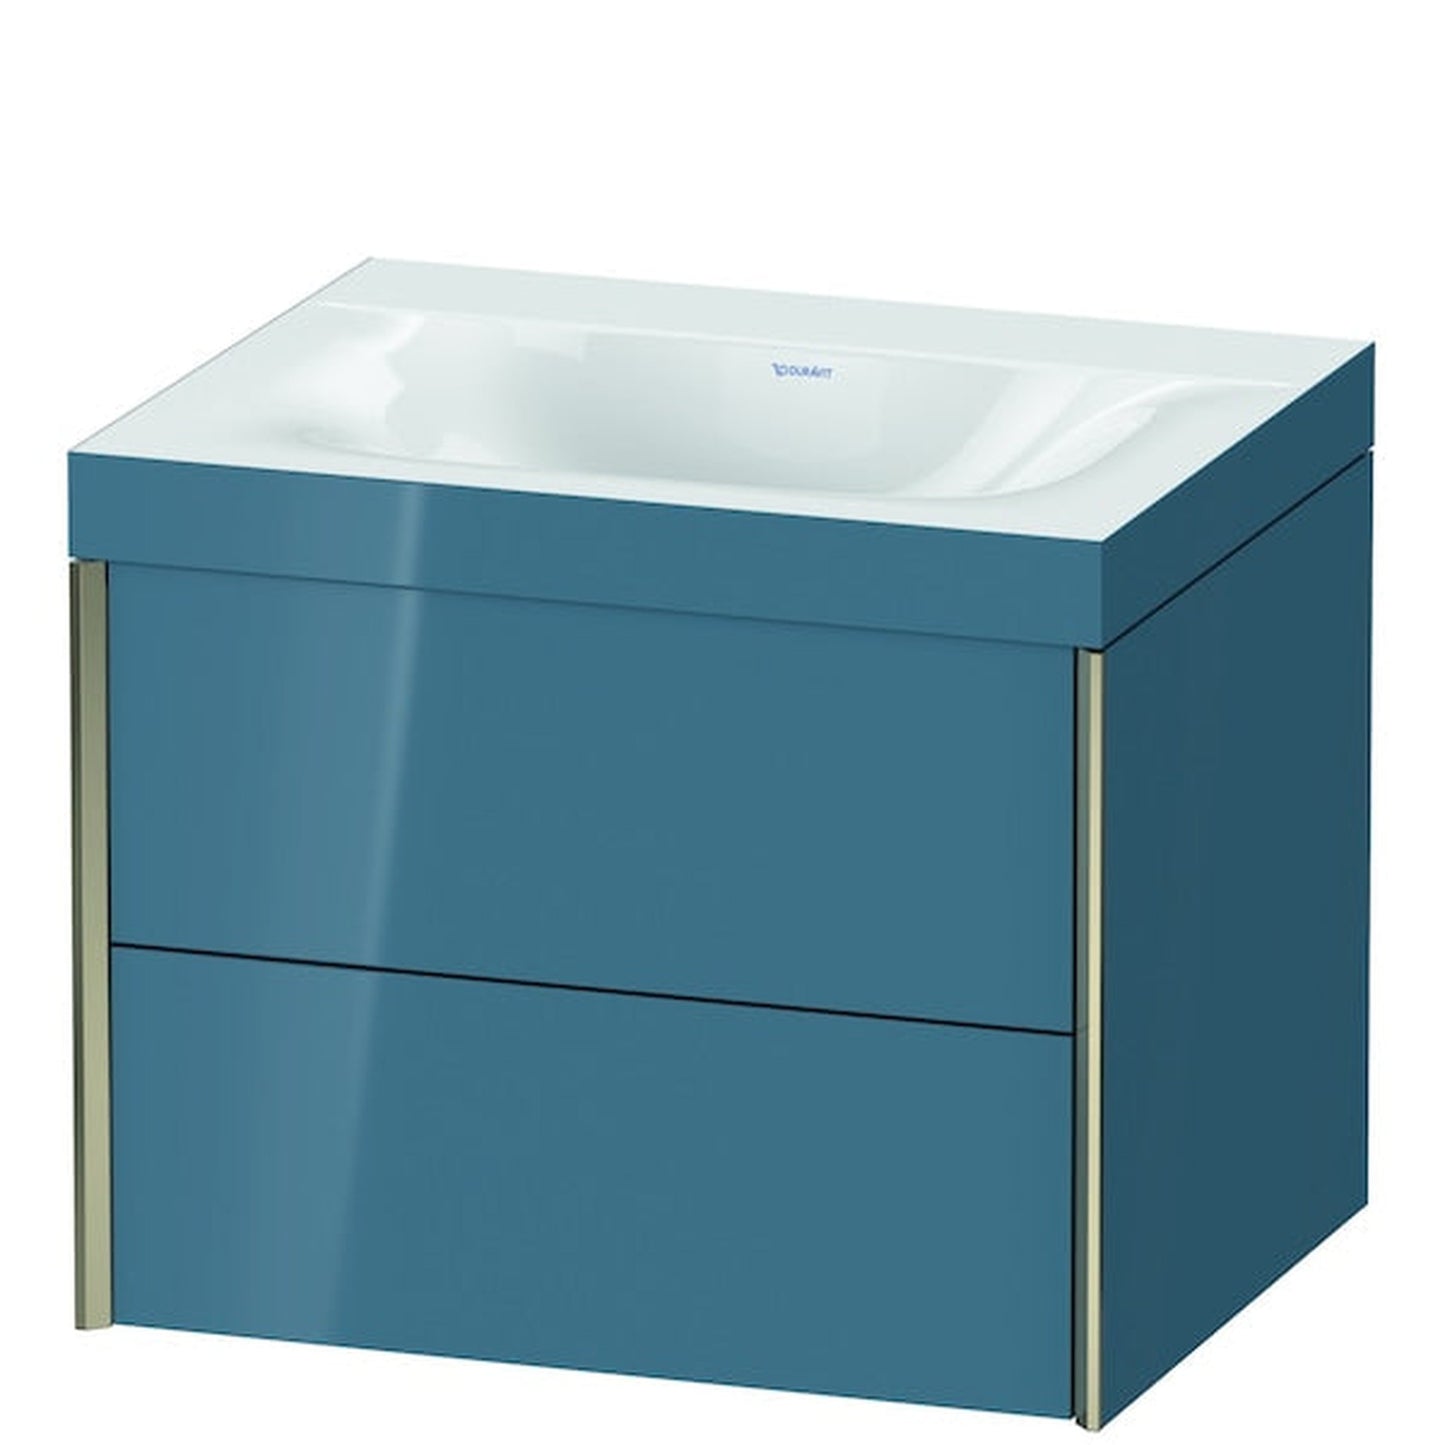 Duravit Xviu 24" x 20" x 19" Two Drawer C-Bonded Wall-Mount Vanity Kit Without Tap Hole, Stone Blue (XV4614NB147C)